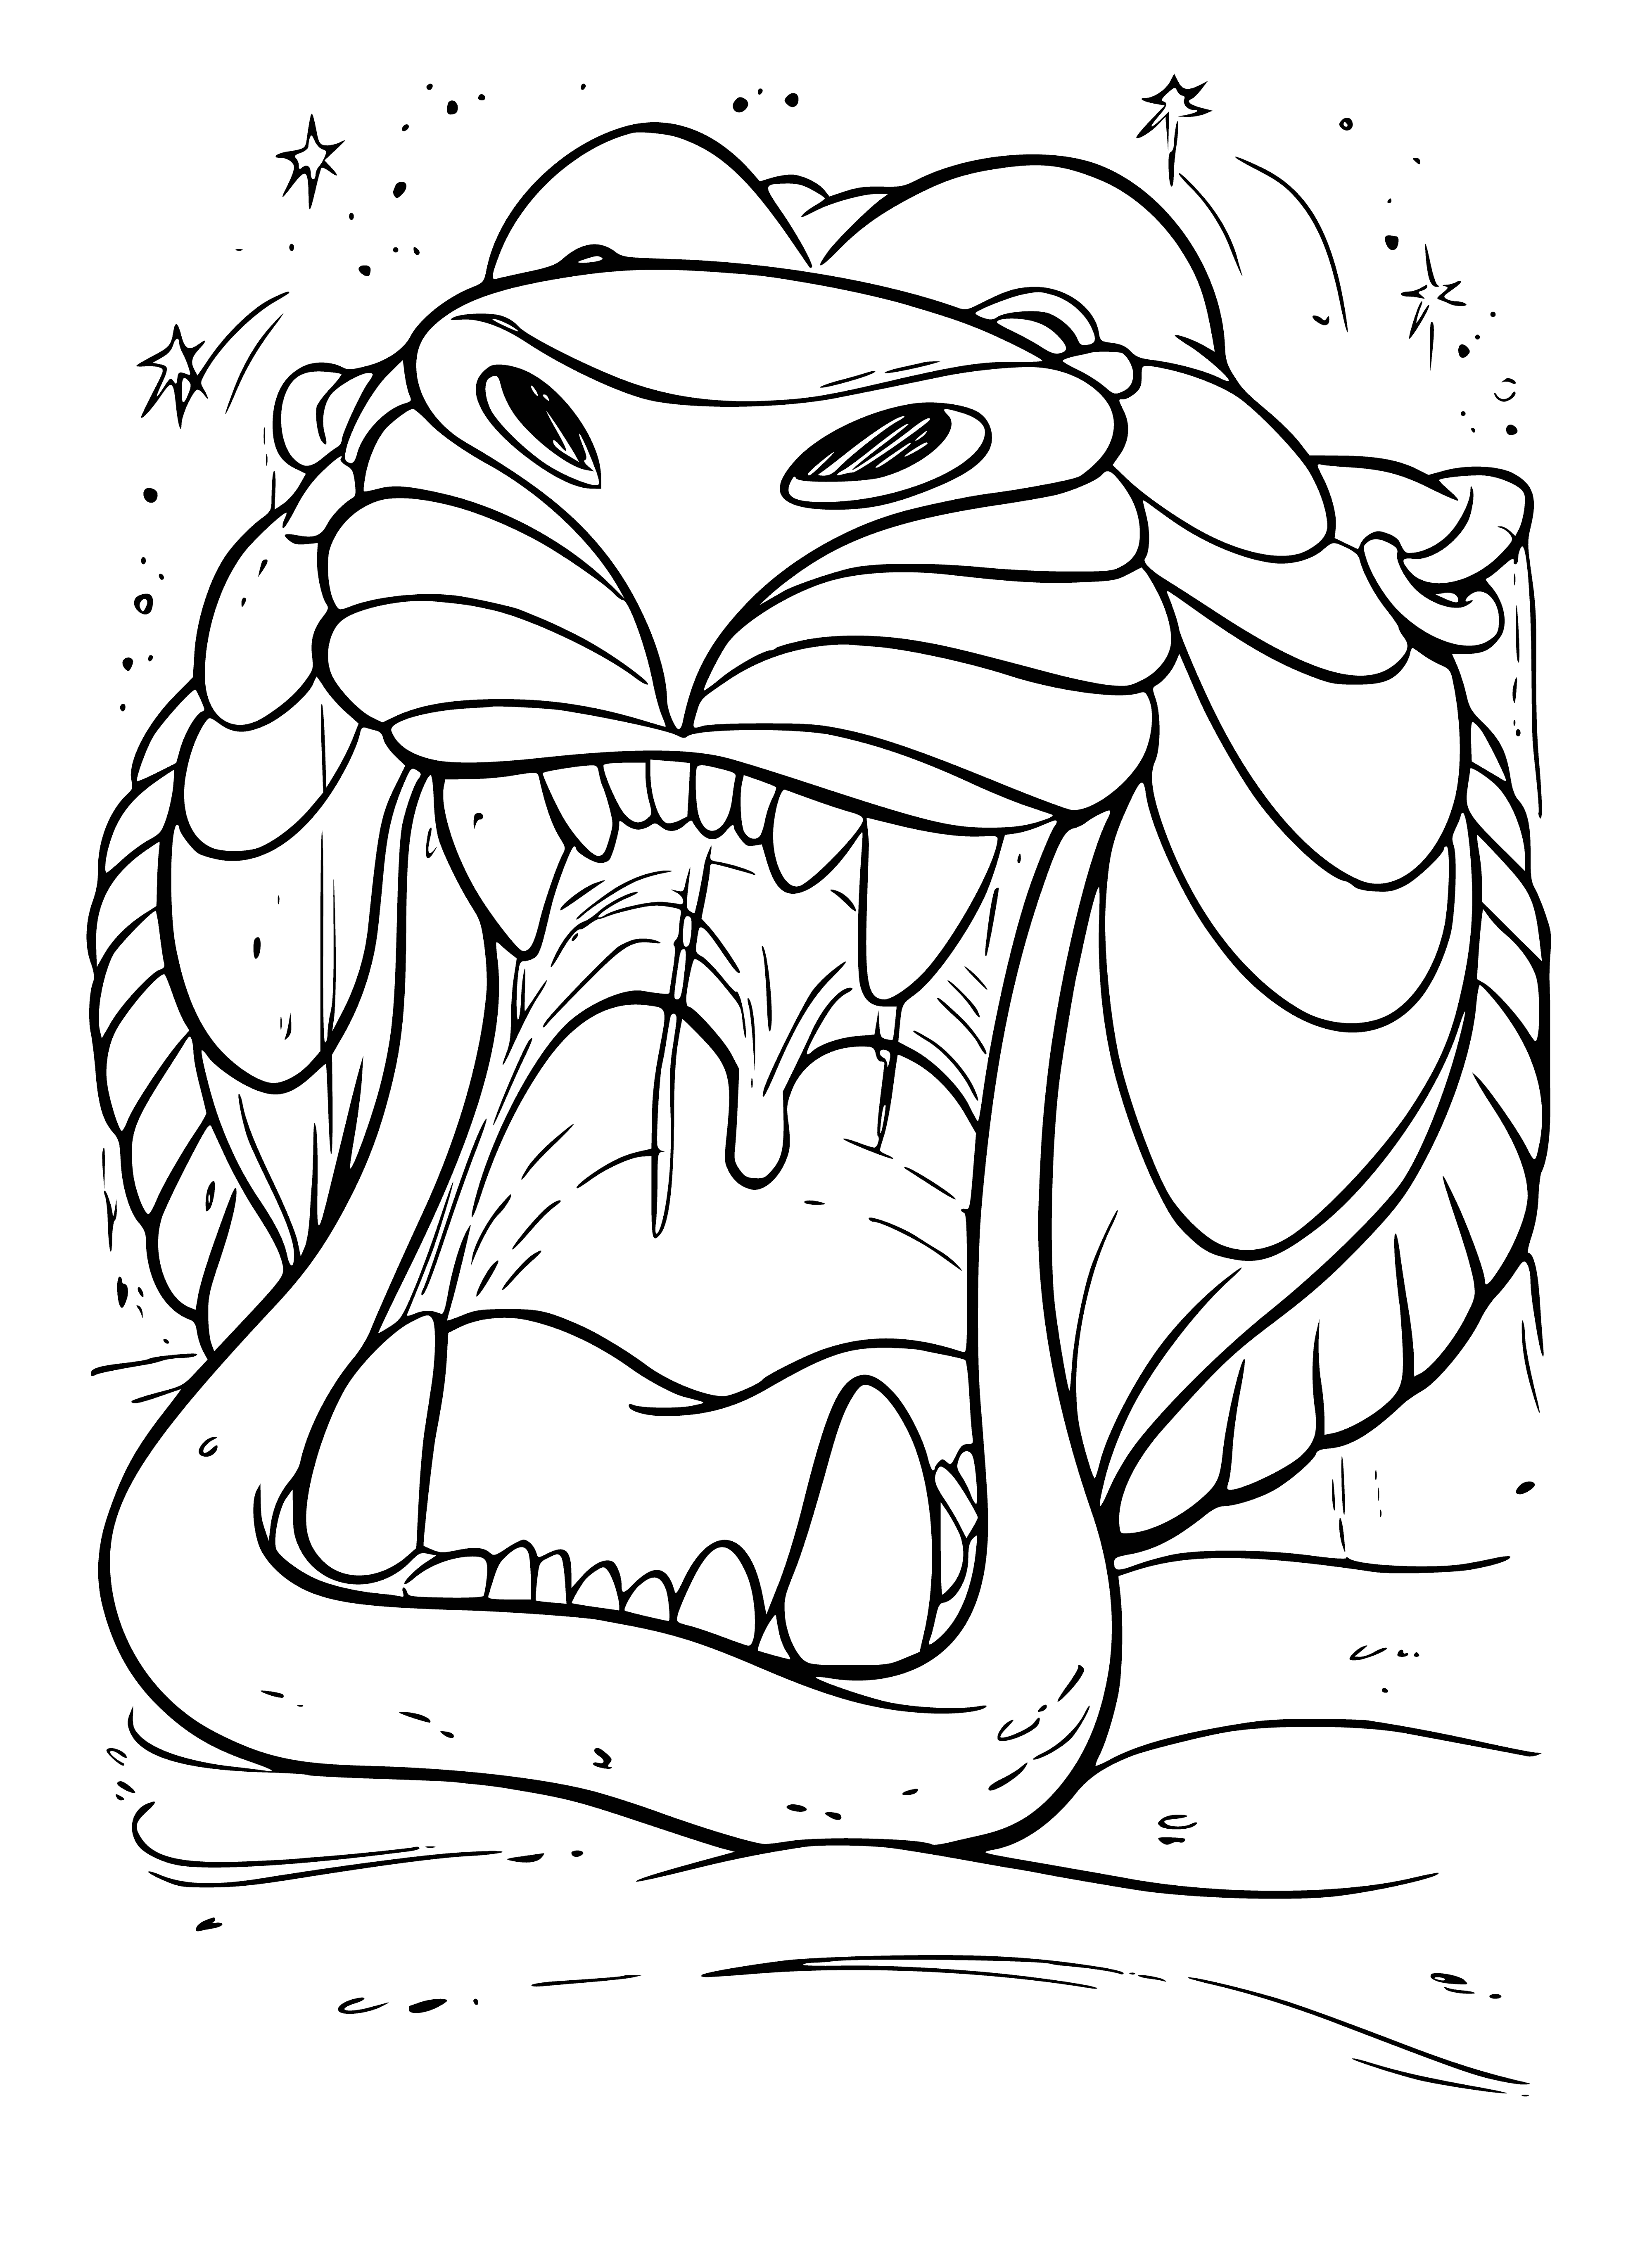 Magic cave coloring page